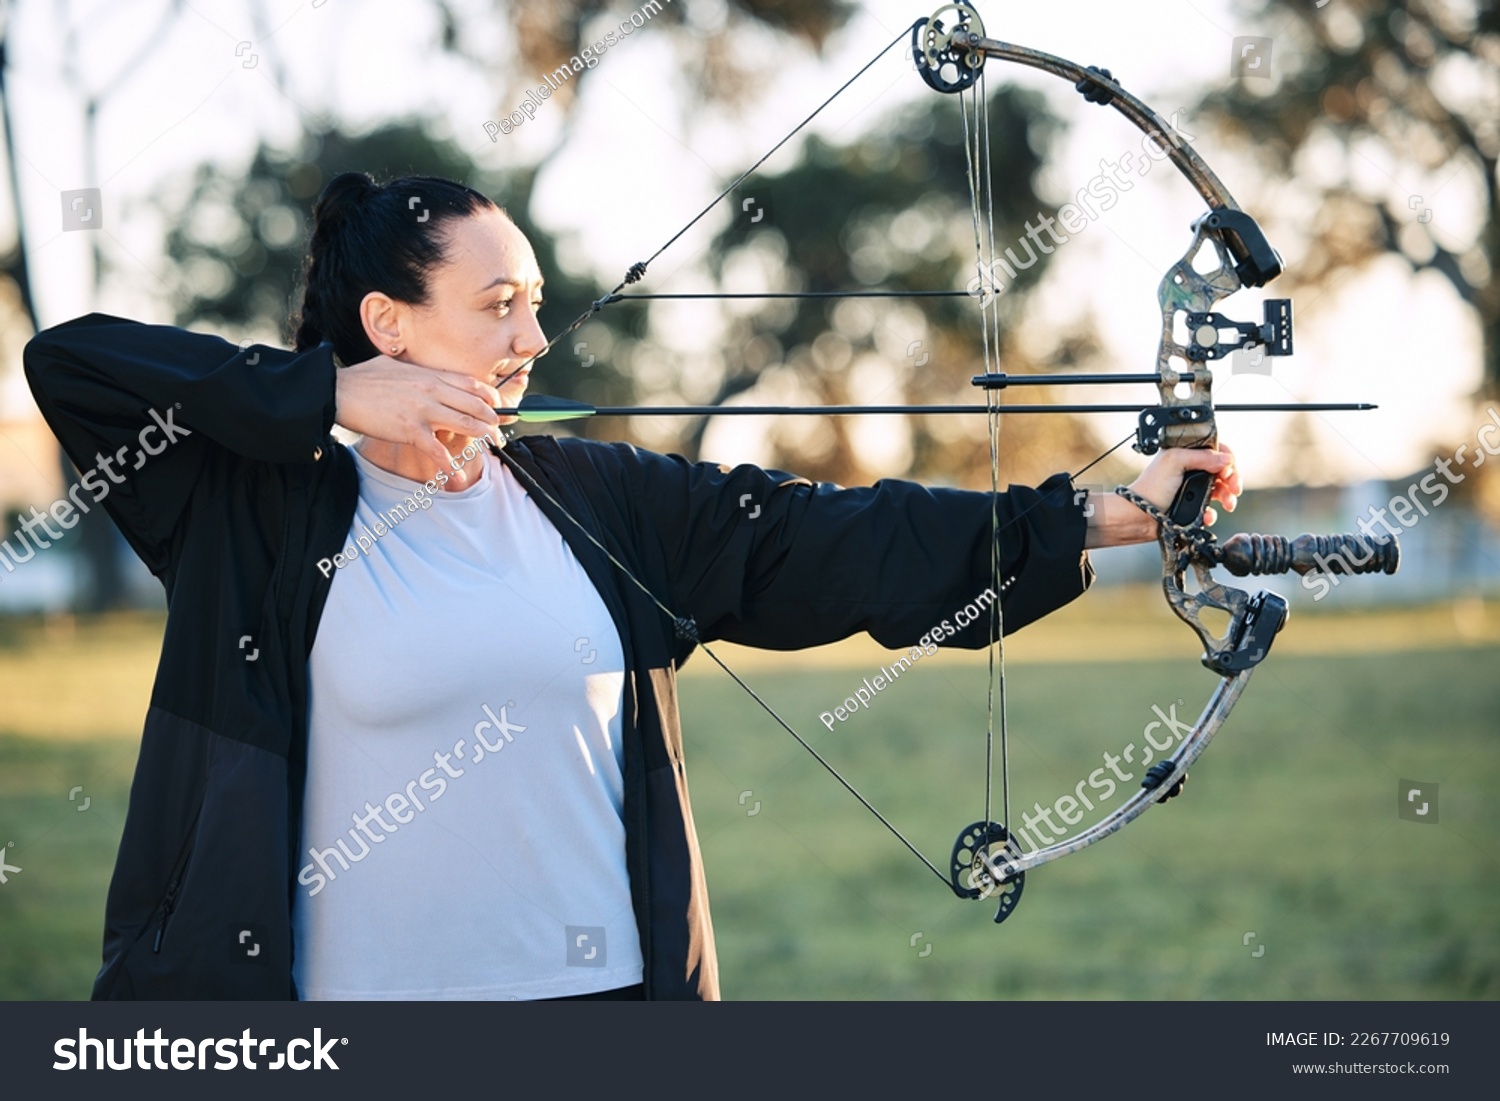 Hobby, learning and woman playing archery as a sport, outdoor activity and game in nature of France. Training, practice and girl with a bow and arrow for sports, competition and shooting at a park #2267709619